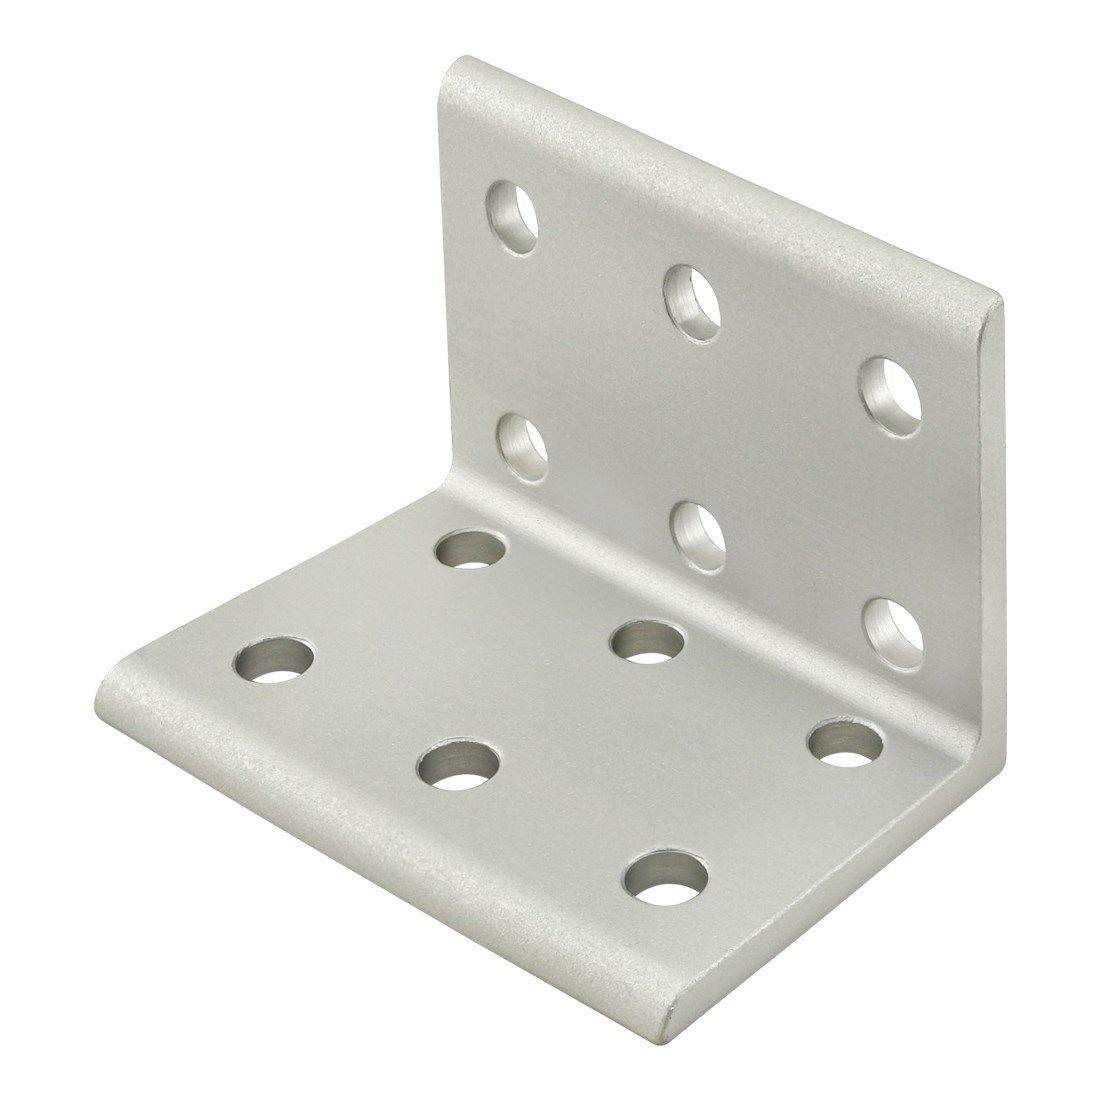 80120 Inside Corner Brackets 12 hole 40 series - Pack of 1 - Extrusion and CNC